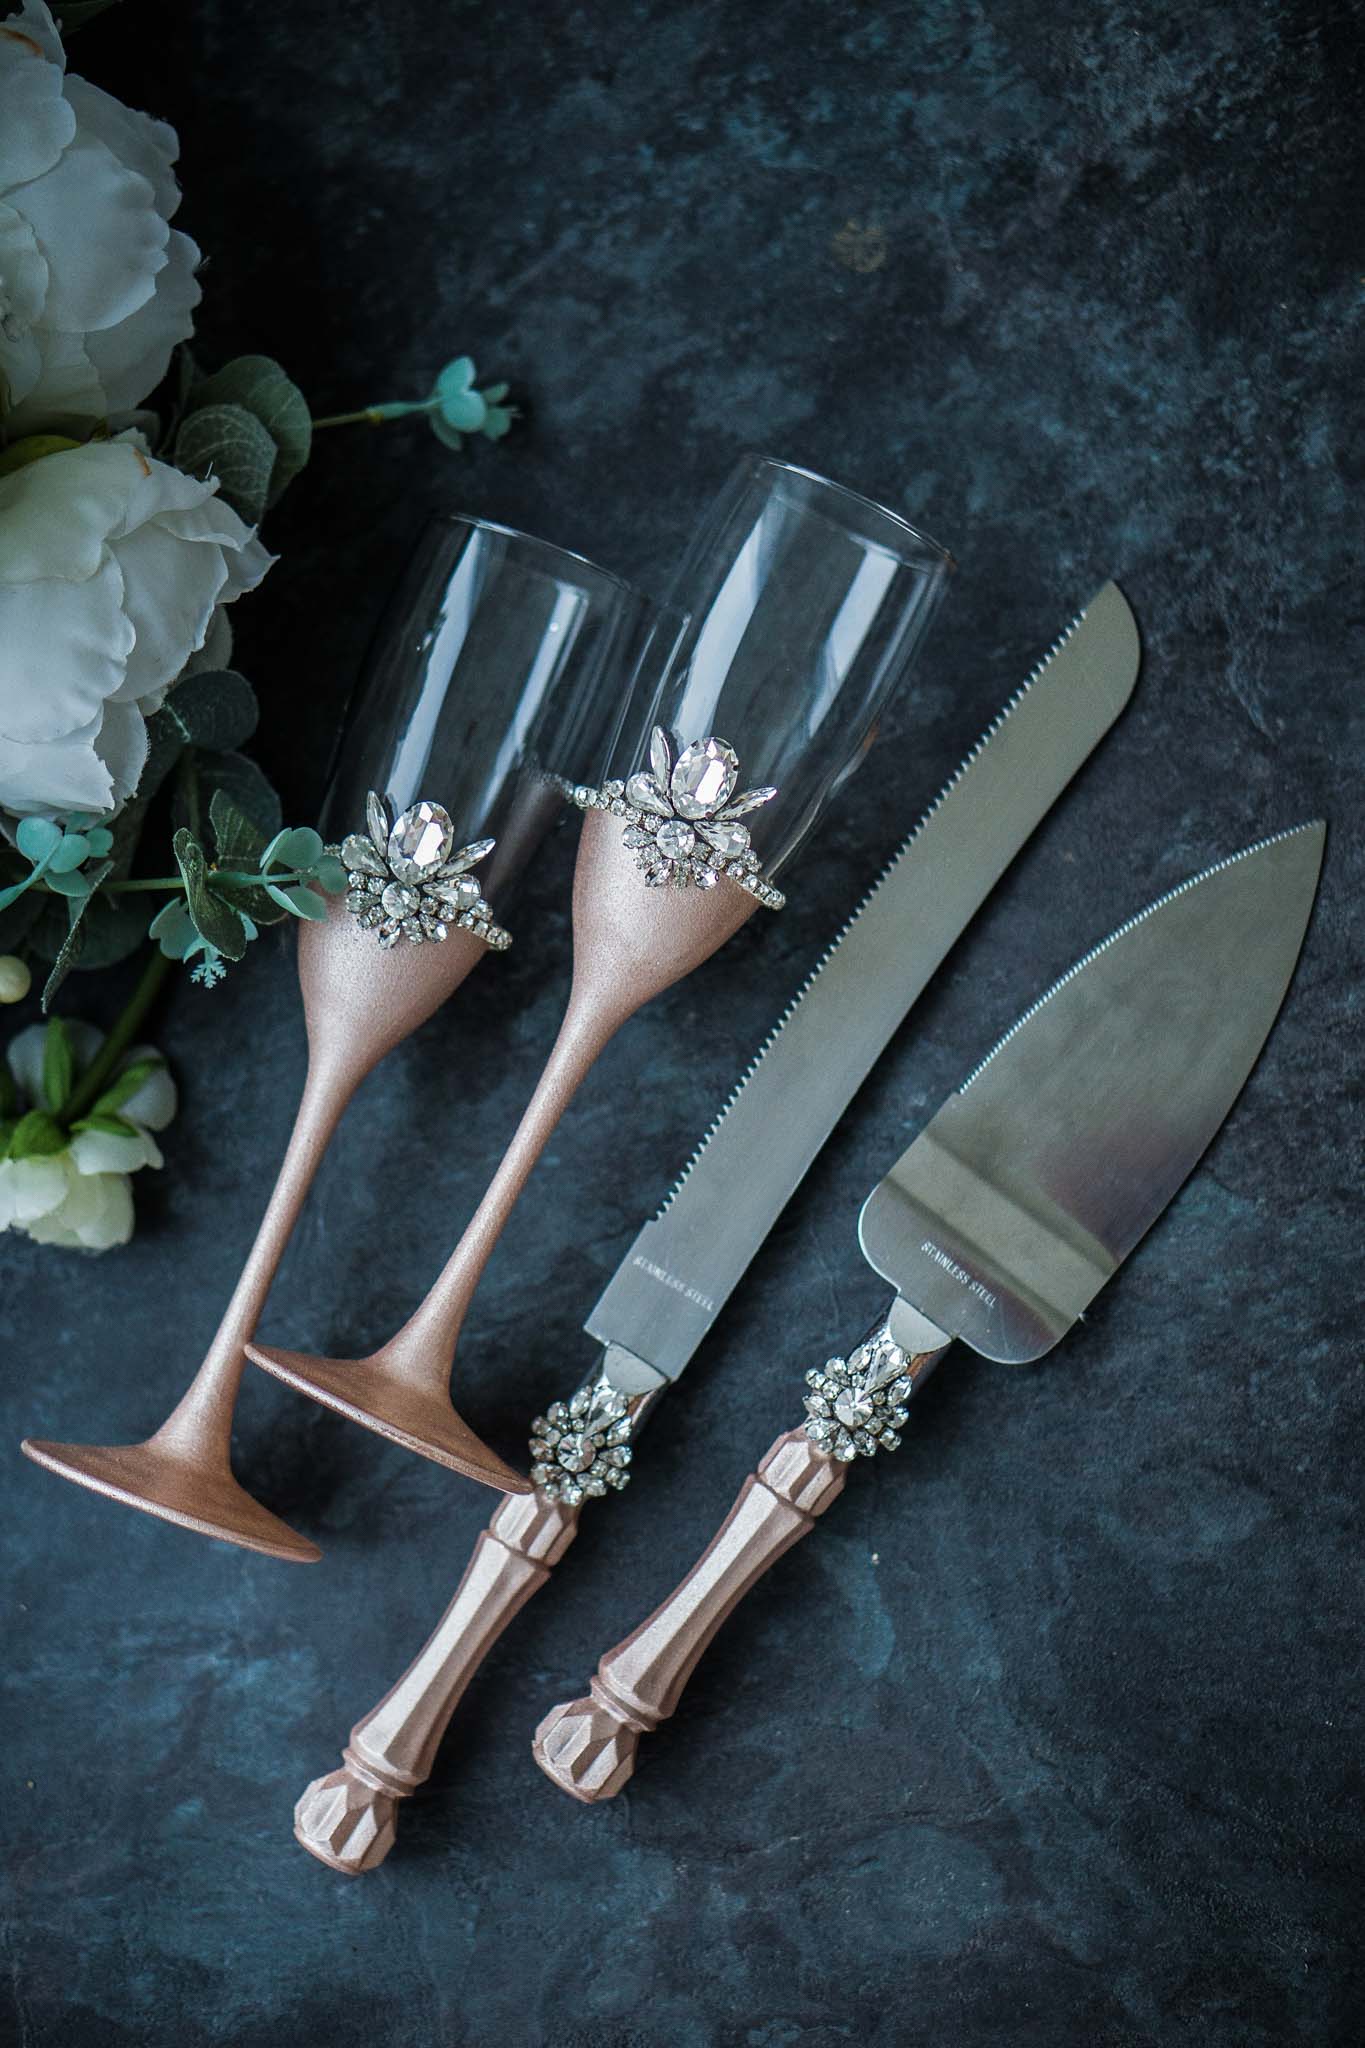 Artisan-crafted rose gold wedding toasting flutes and cake server